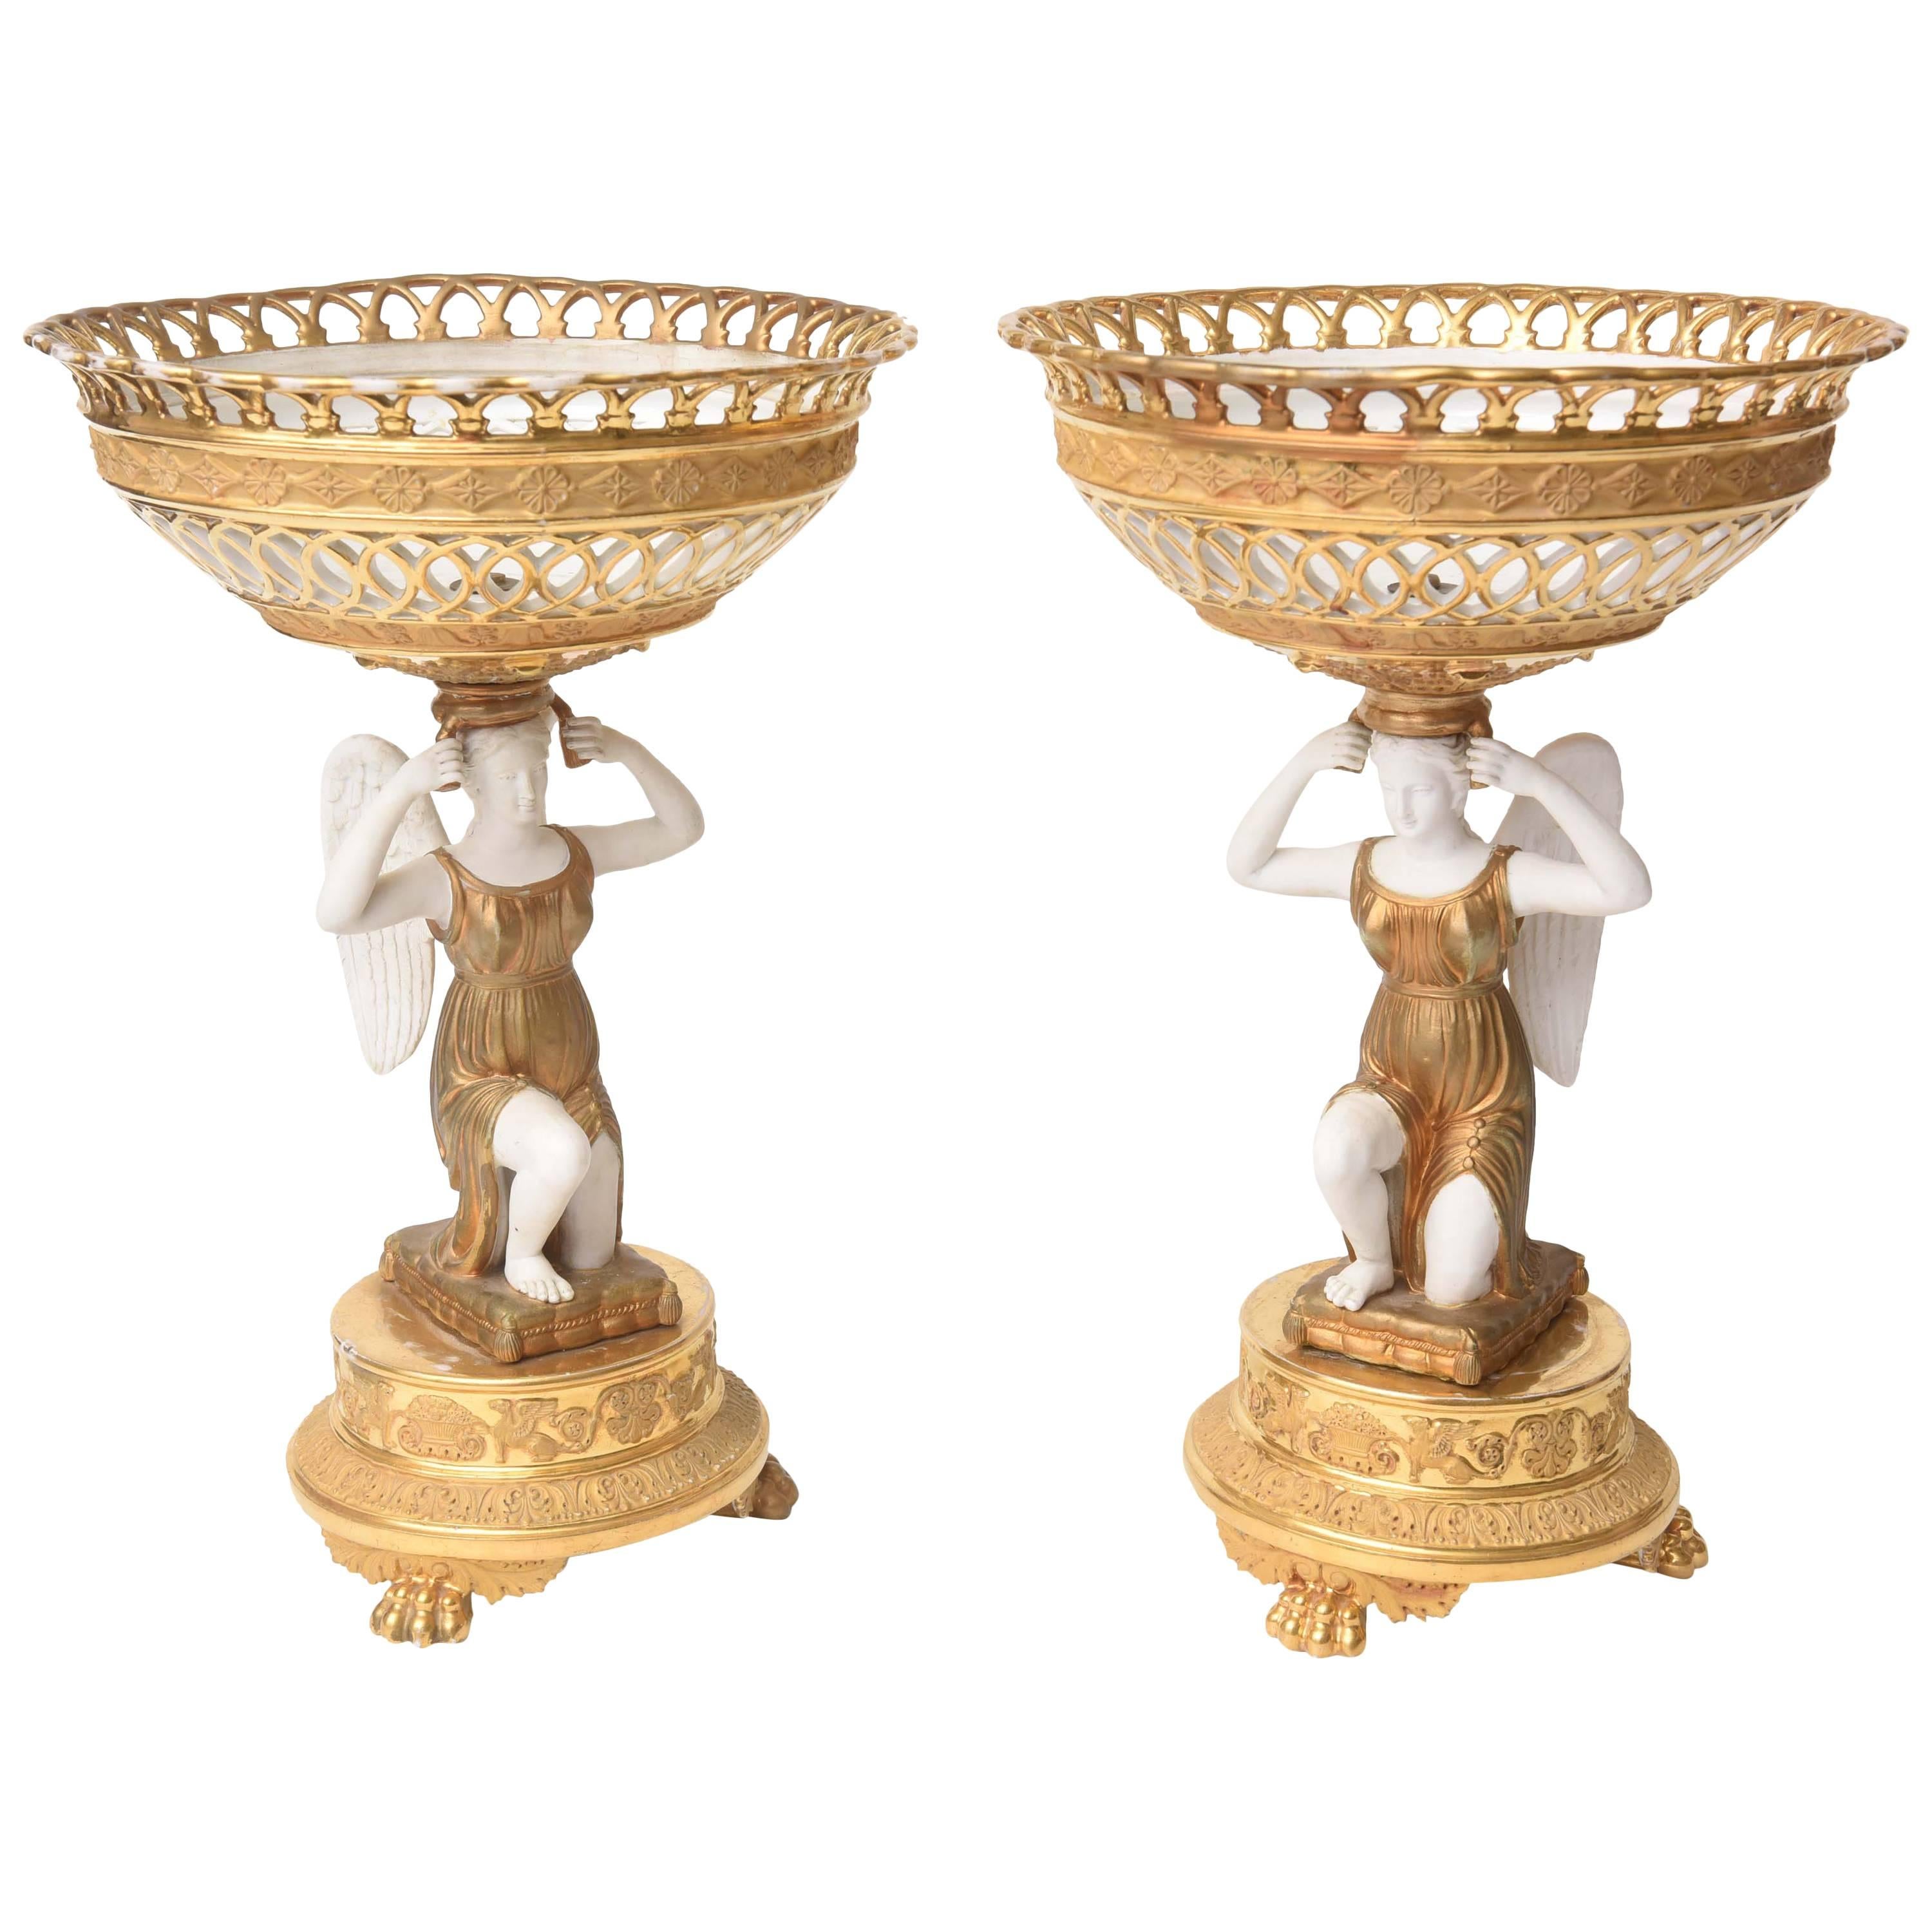 Pair of Antique First Period French Empire Centerpiece Tazzas or Fruit Compotes